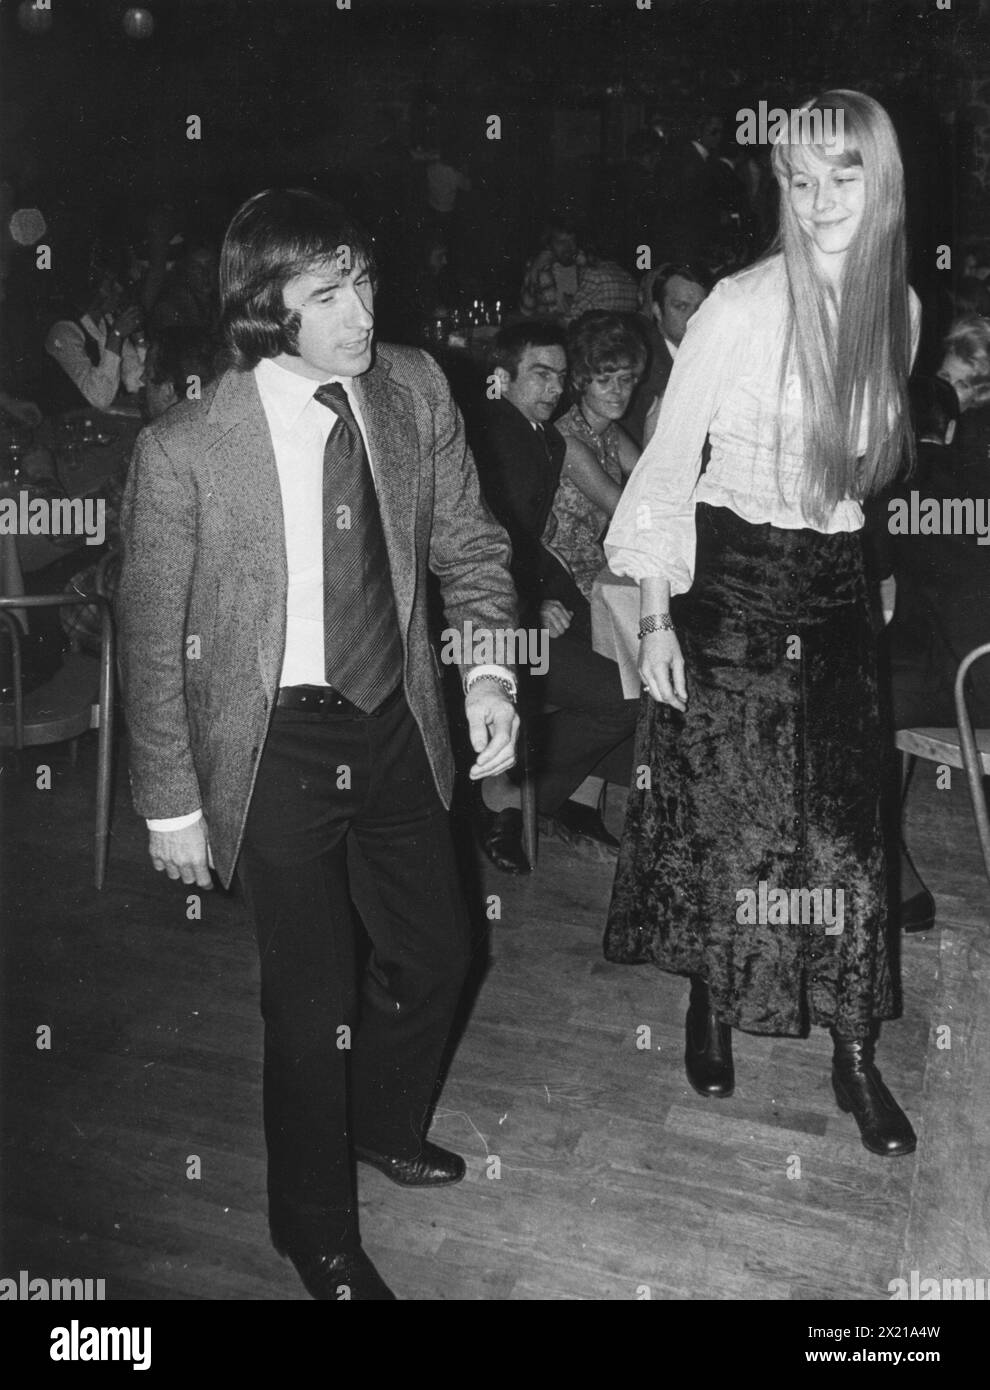 Stewart, John 'Jackie', * 6.11.1939, britischer Rennfahrer, Dancing with Matins Kruuse, 1971, ADDITIONAL-RIGHTS-CLEARANCE-INFO-NOT-AVAILABLE Stockfoto